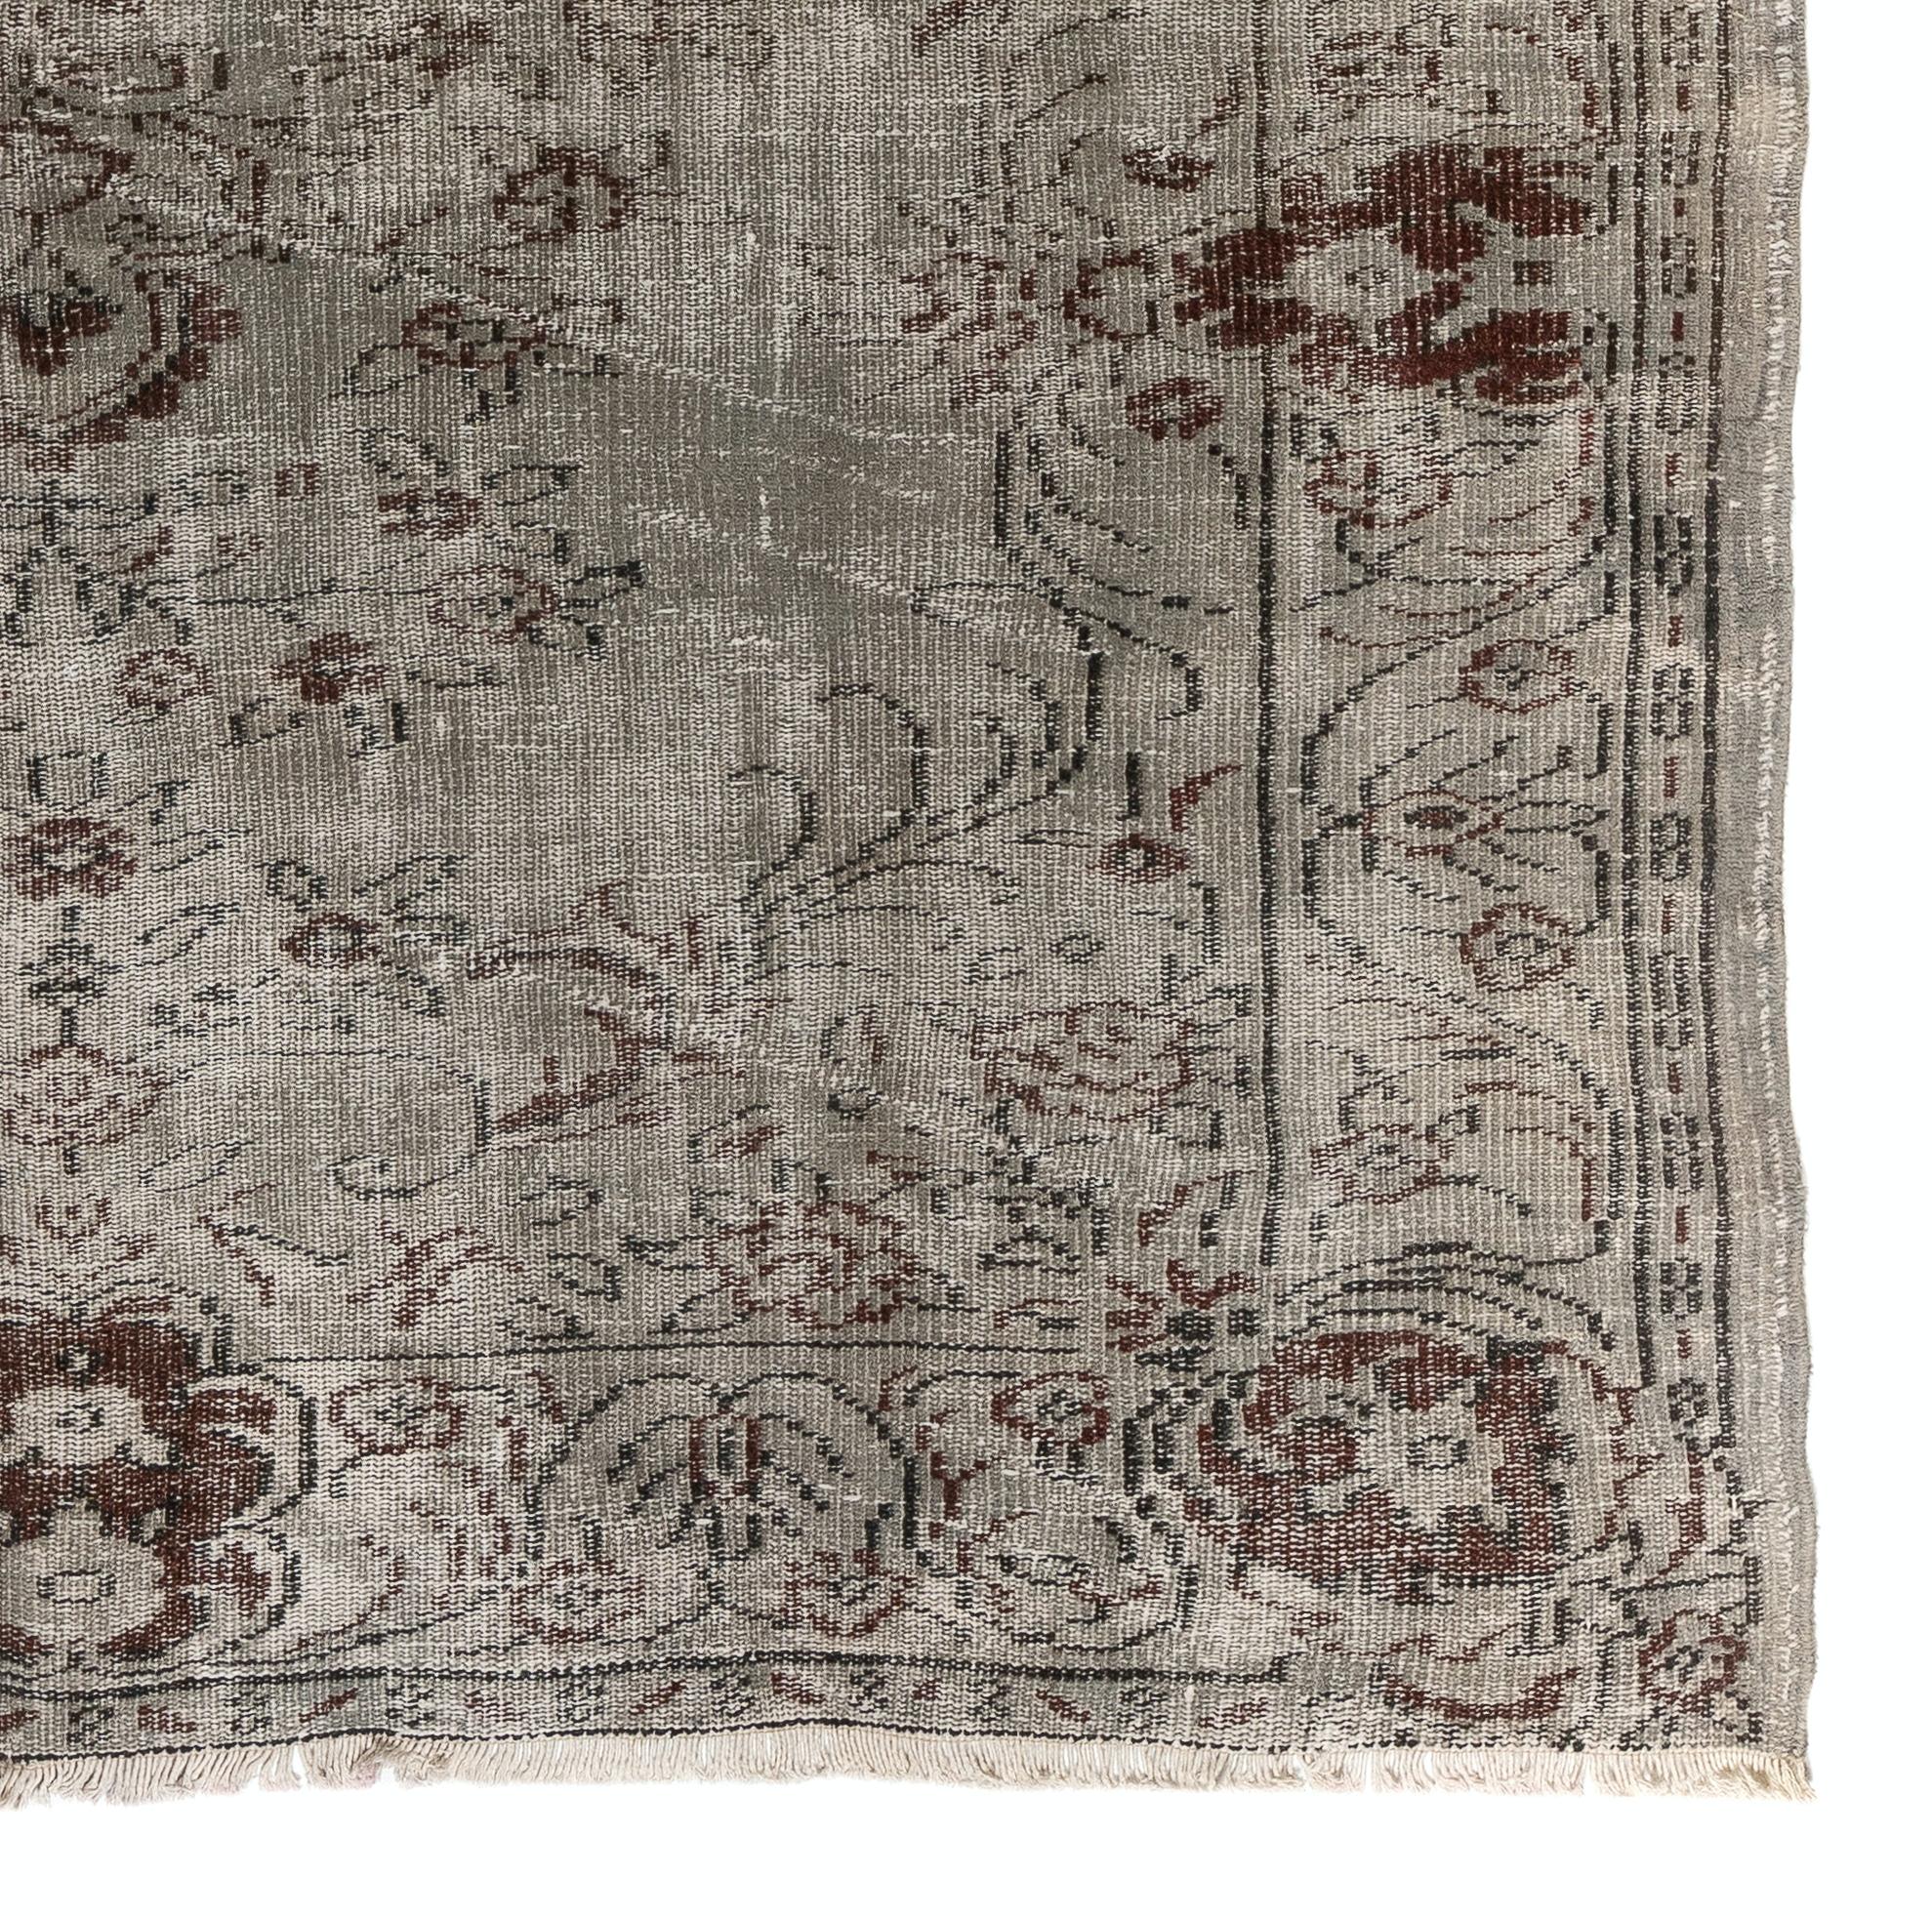 6.3x9 ft Vintage Handmade Turkish Area Rug in Gray with Floral Medallion Design In Good Condition For Sale In Philadelphia, PA